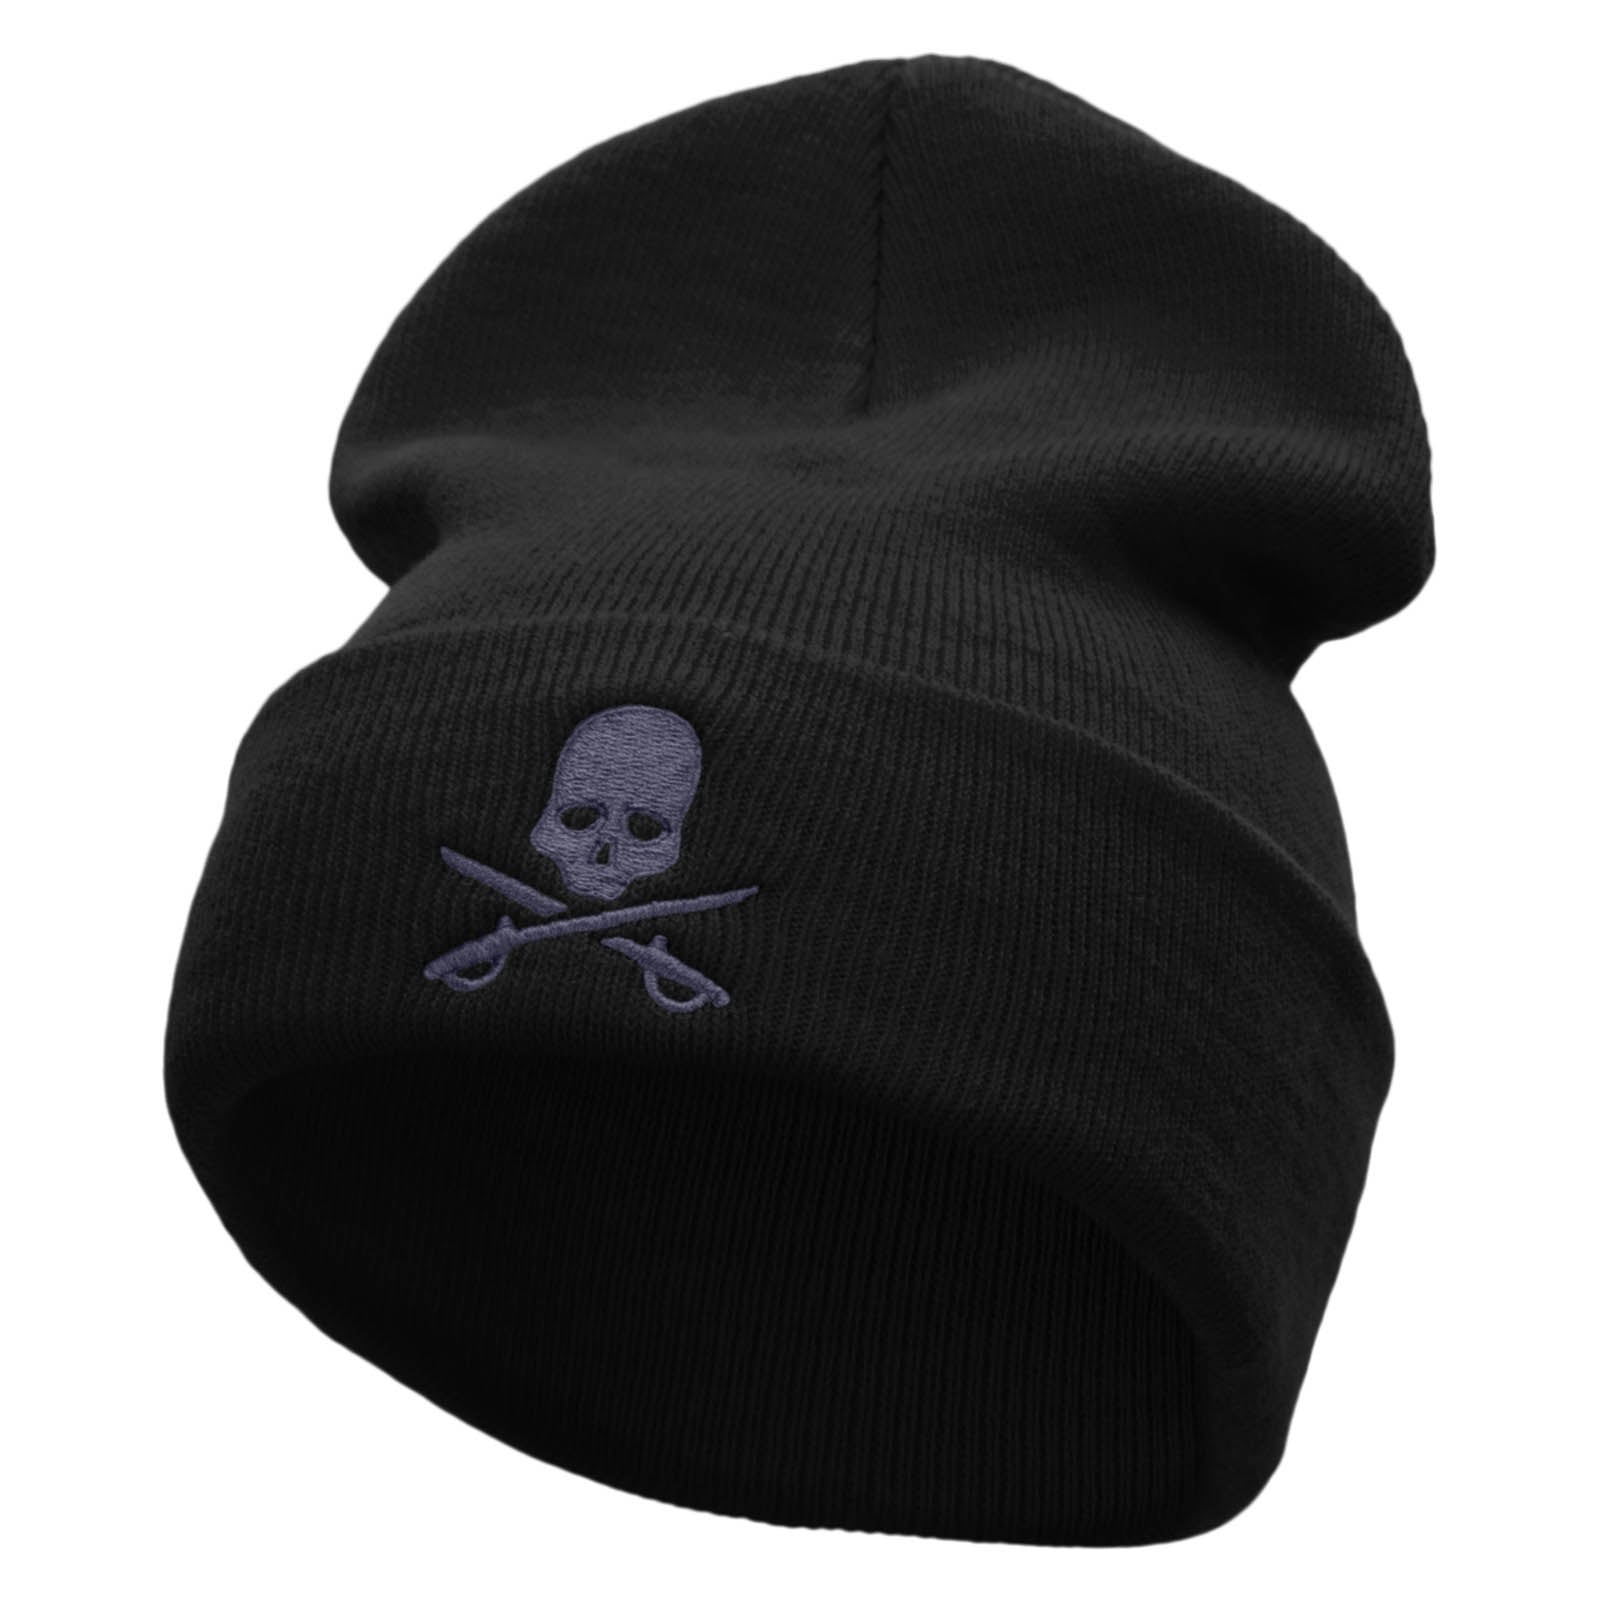 Skull And Sword Embroidered 12 Inch Long Knitted Beanie - Black OSFM